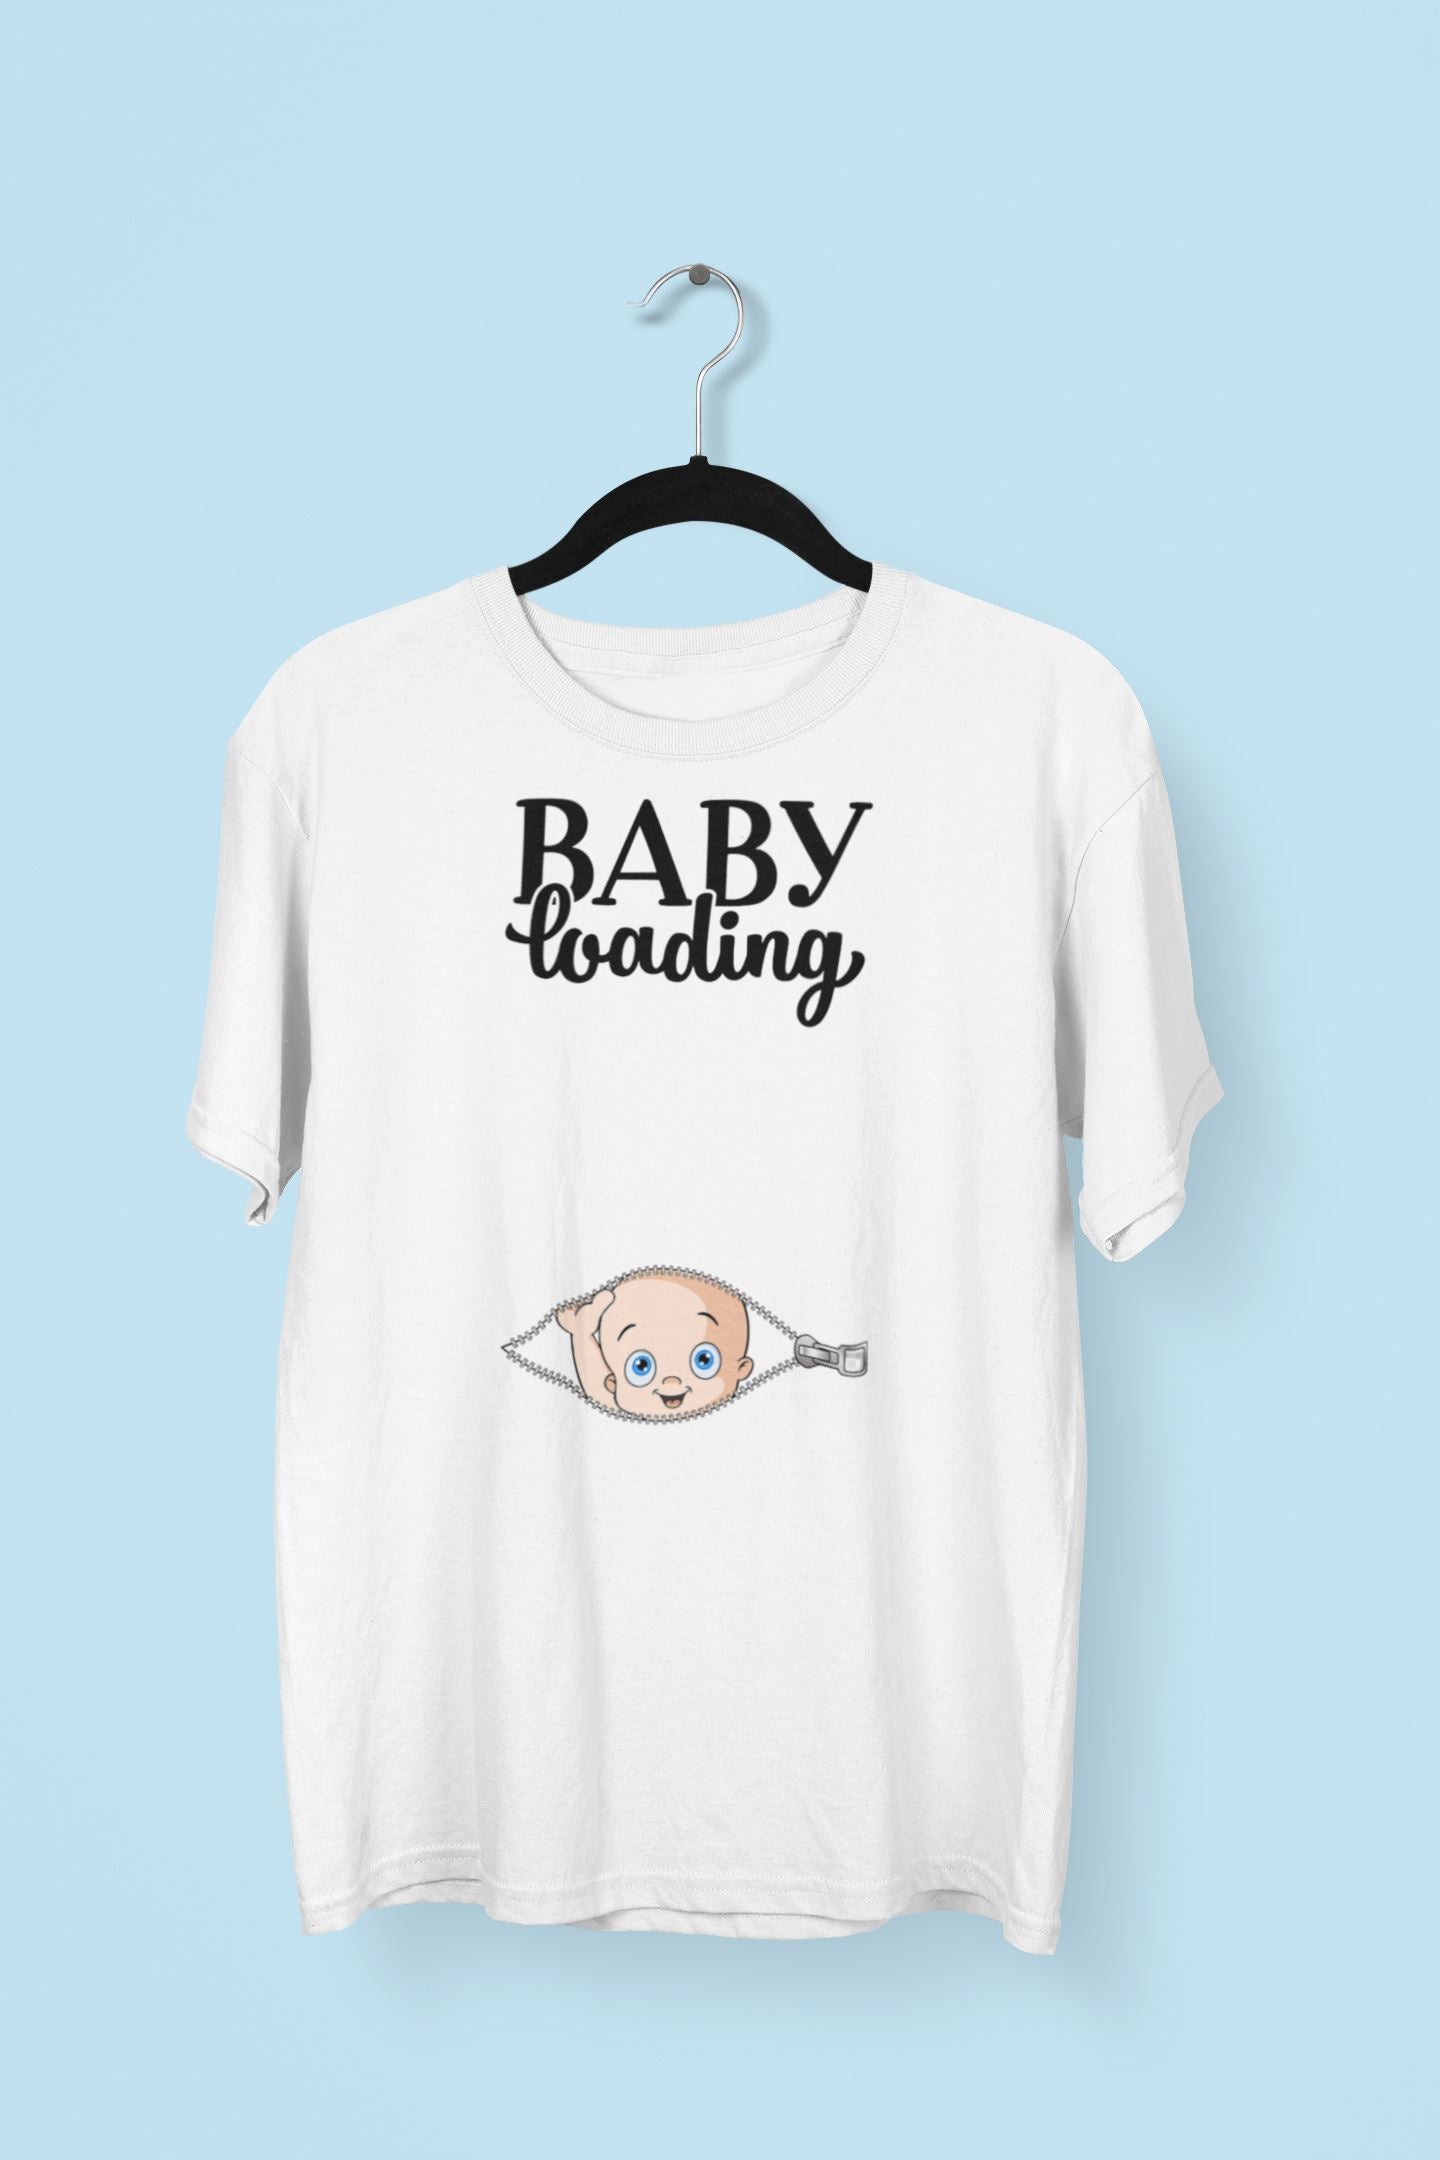 Baby Loading with a Surprise Special White T Shirt for Women Shirts & Tops Printrove 